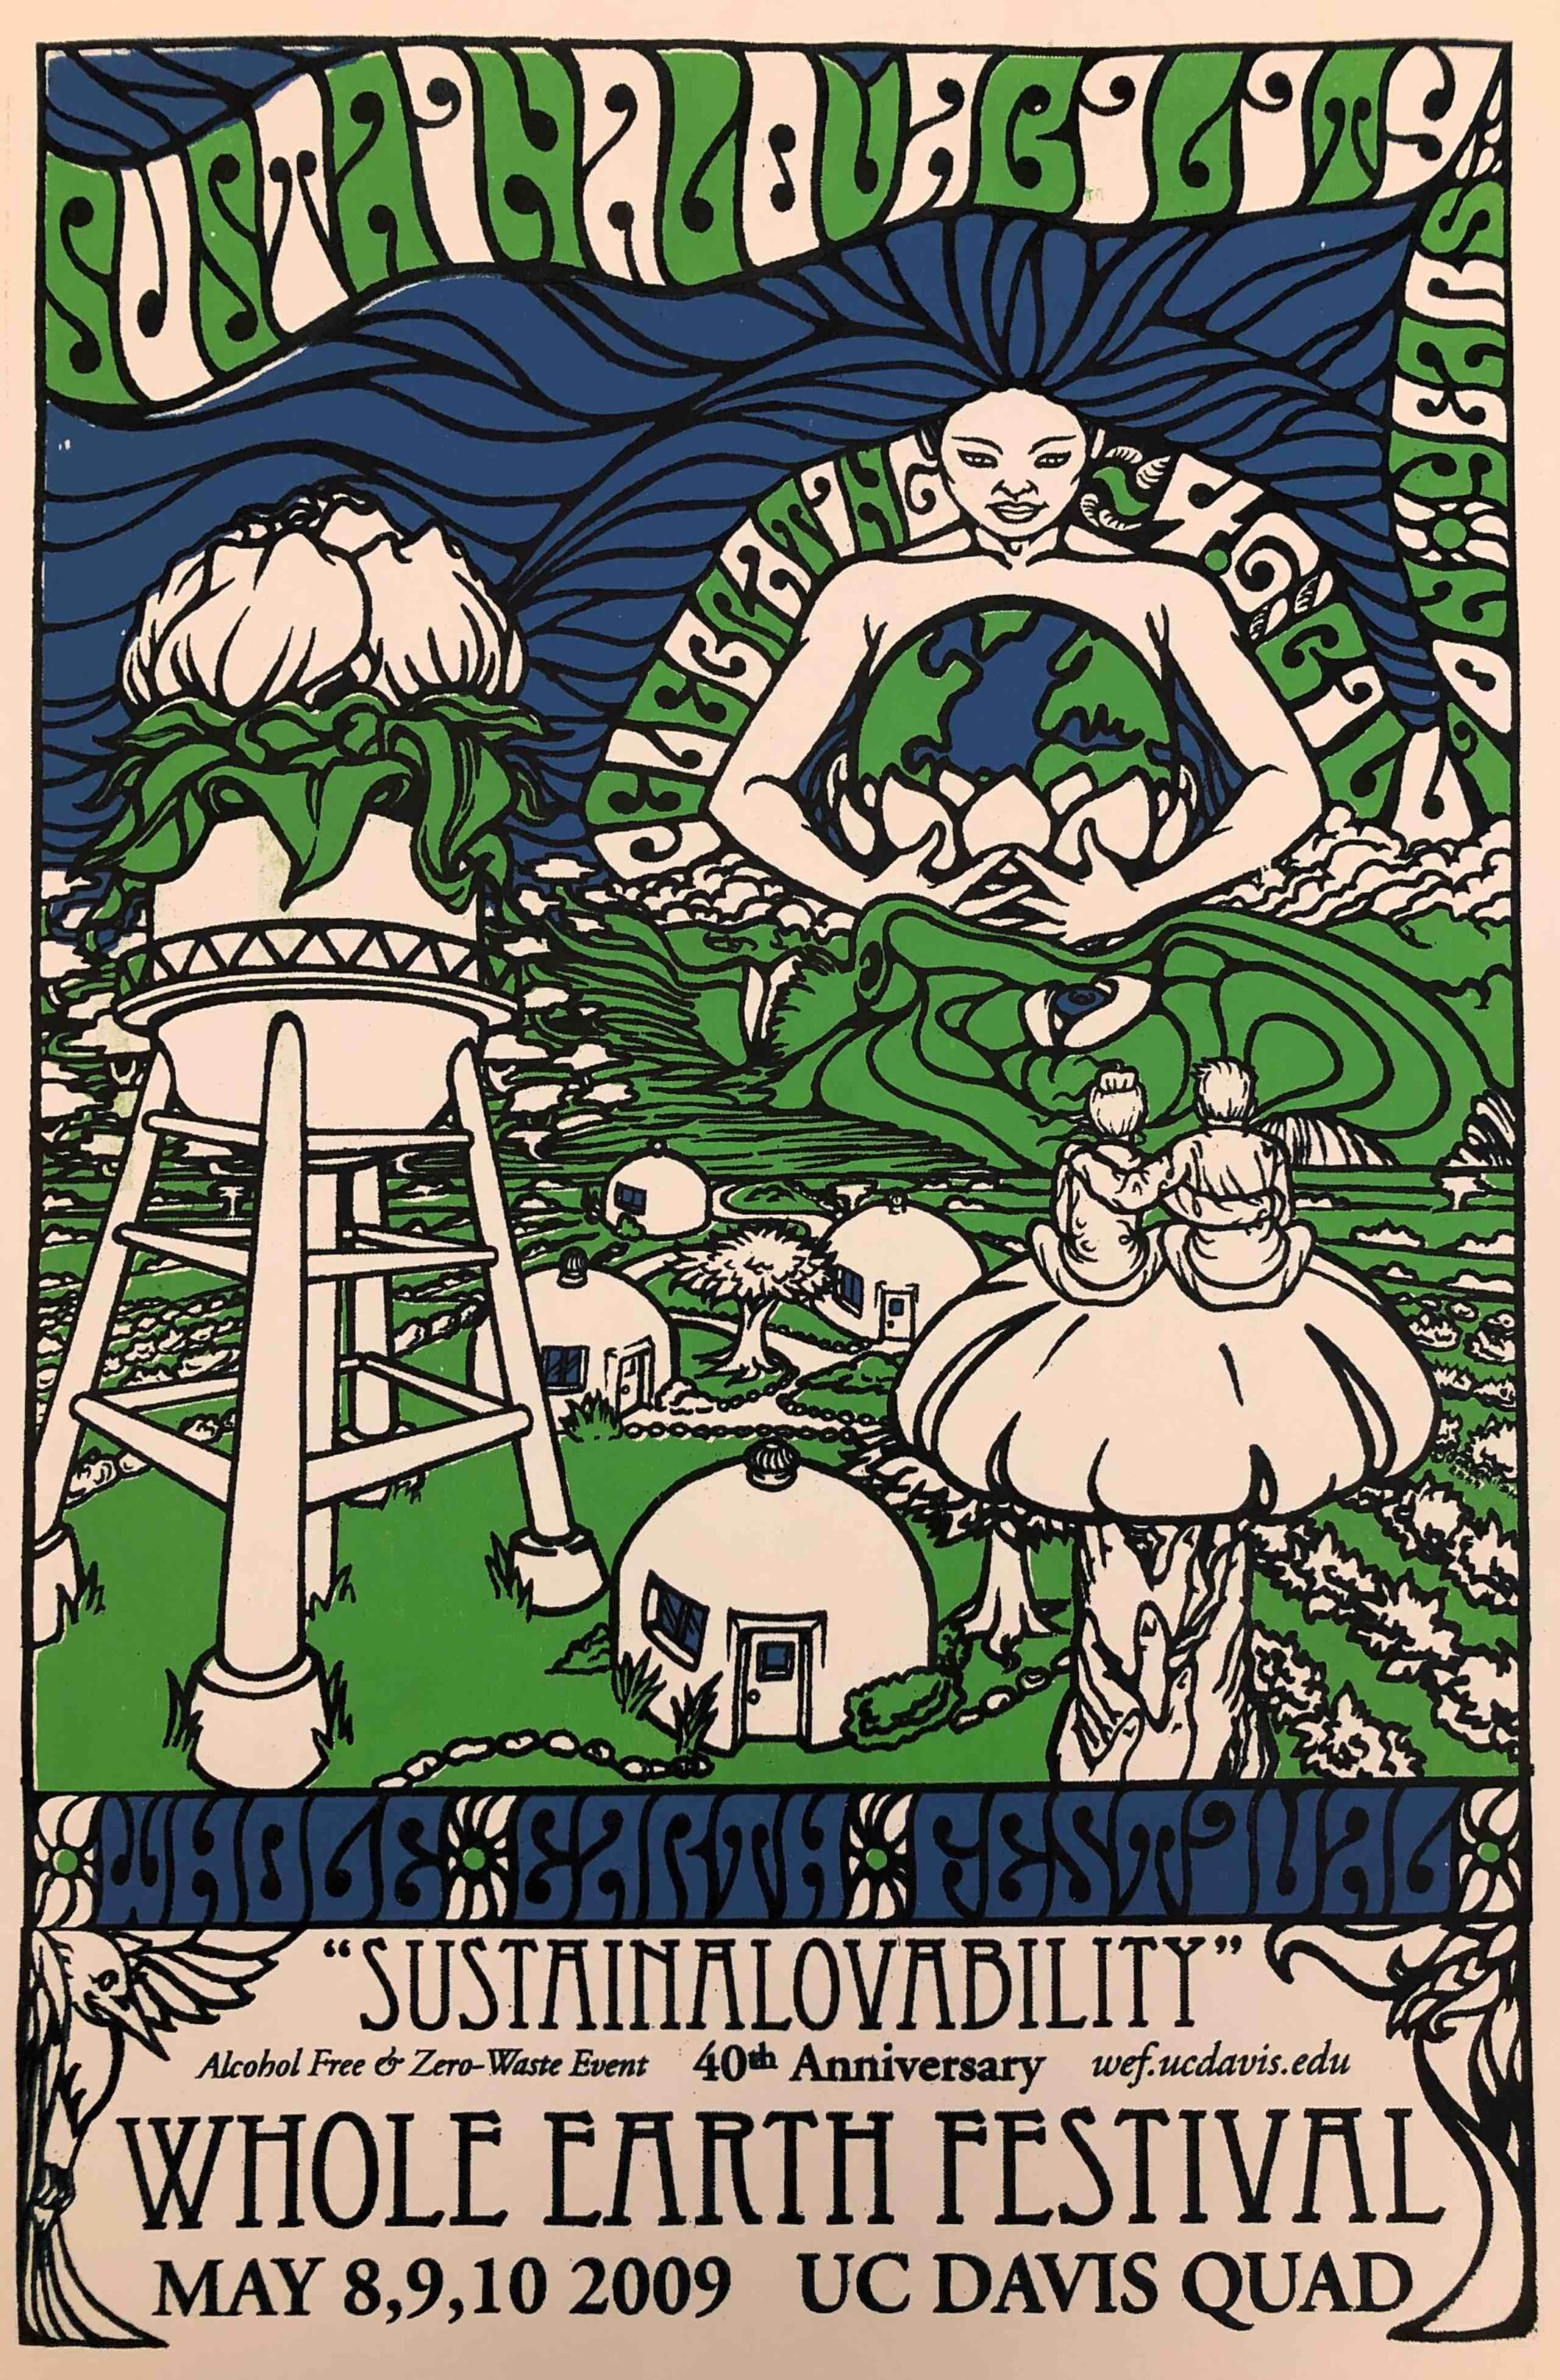 Poster for the 2009 Whole Earth Festival